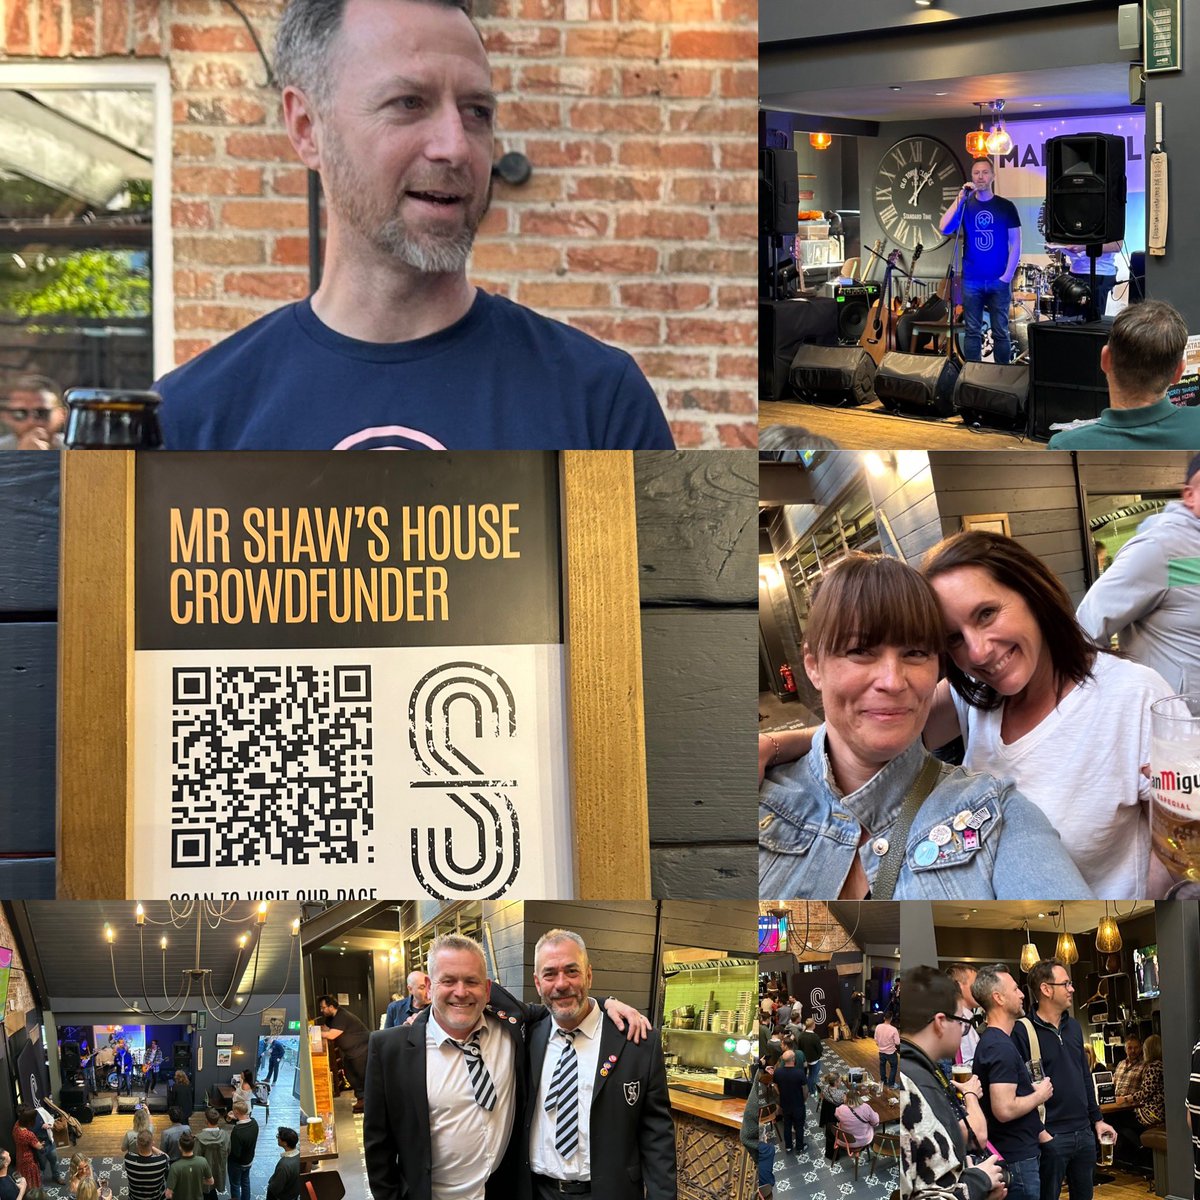 Awesome evening for @MrShaw75 #crowdfunder launch - huge shoutout to @DerbyBrewingCo for hosting, @marseilleband & @TTYearsOfficial for playing, @Lindsey_Hats @bevcr @cosyfund @eddcunliffe @darleydance @Penguin_PR @CADforFashion @HUUBDesign for supporting on the night. 🖤💪🏻🎶 1/2